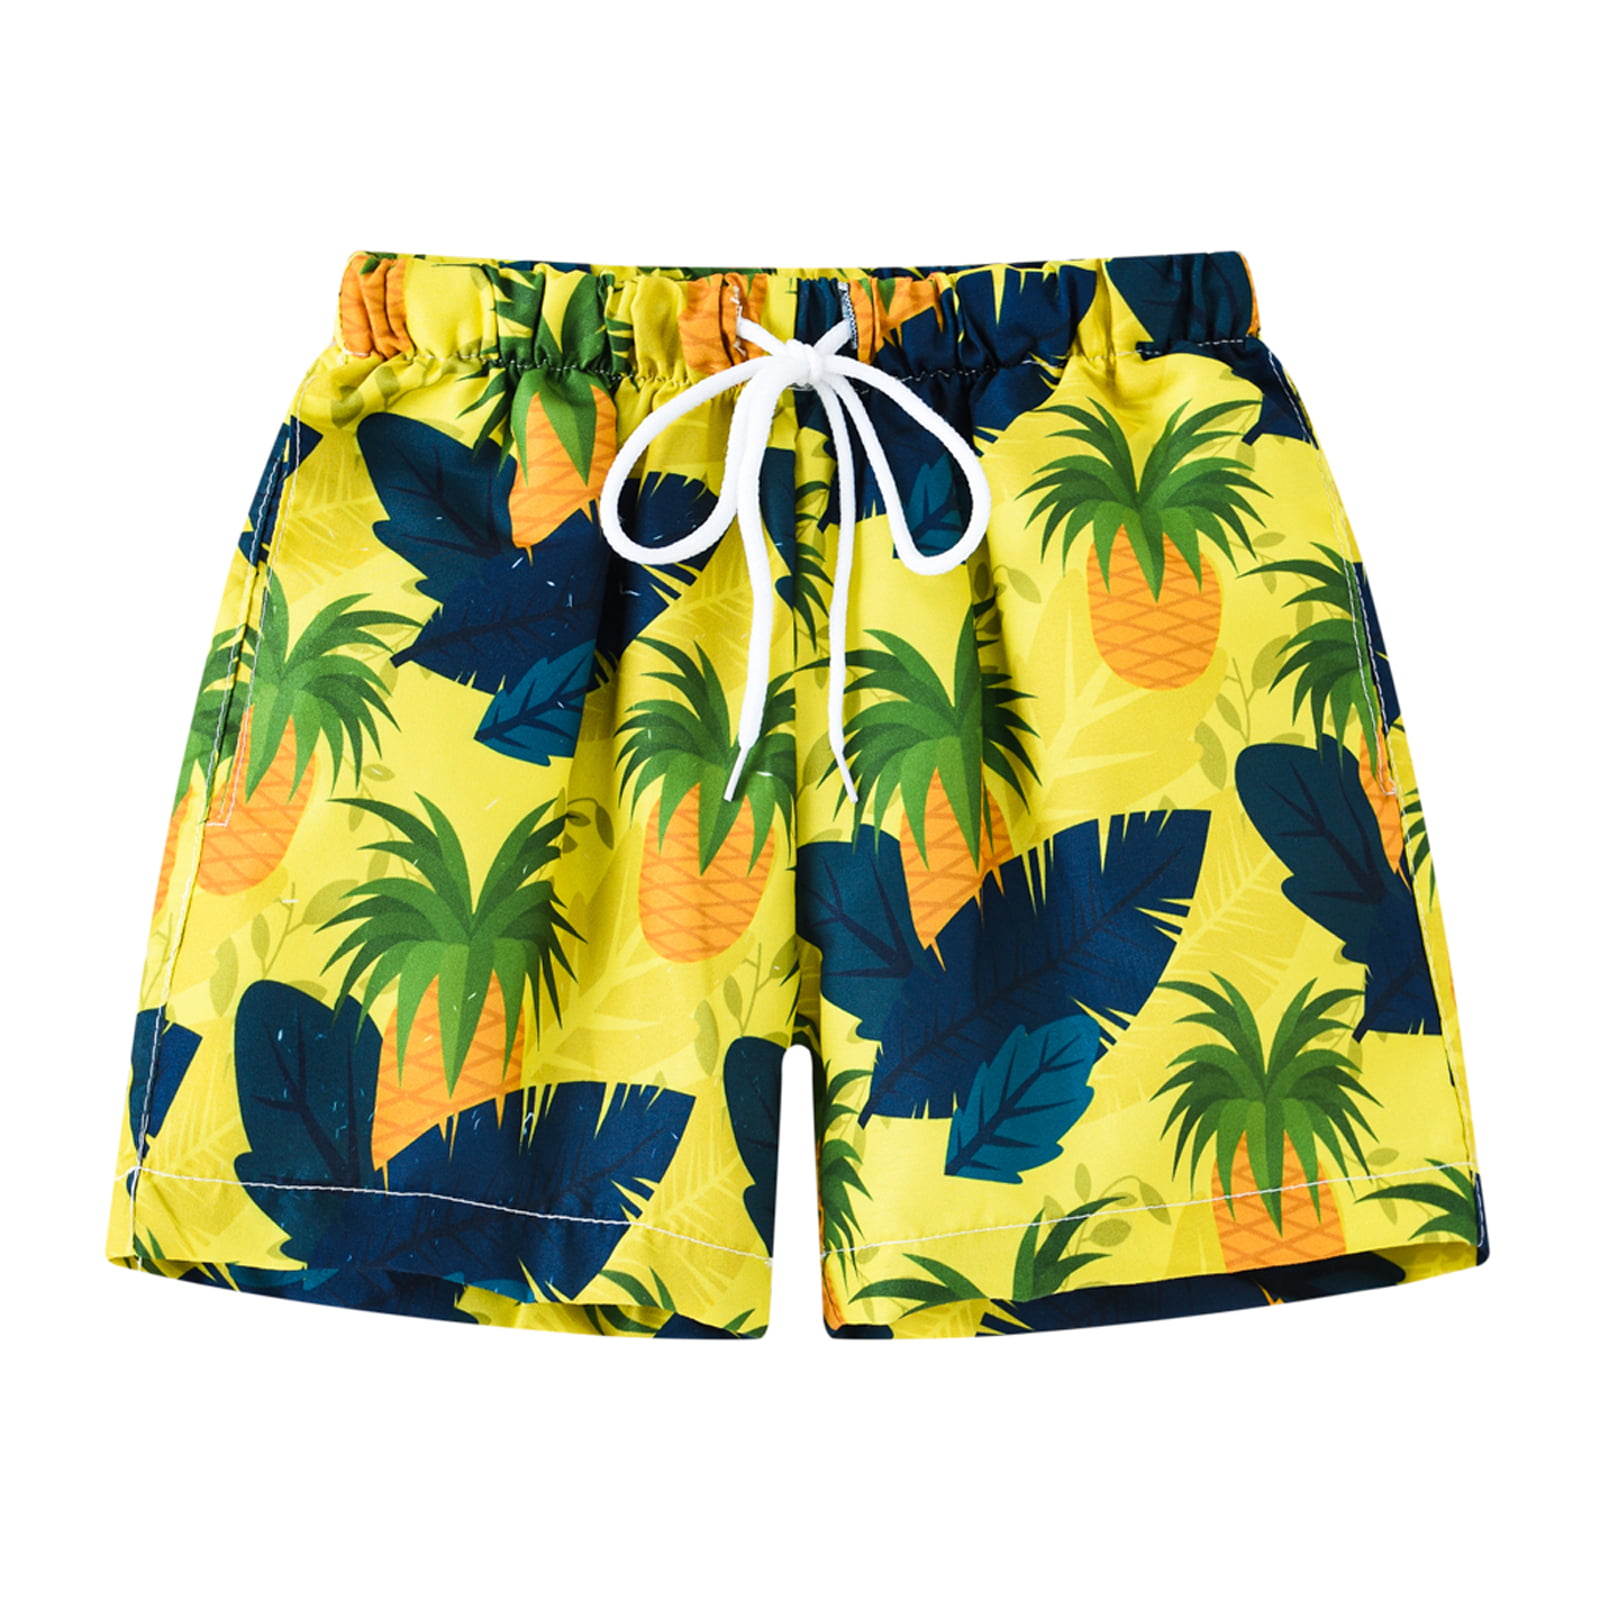 Four Leaf Clover Mens Casual Quick Dry Drawstring Printed Swimsuit Beach Board Shorts